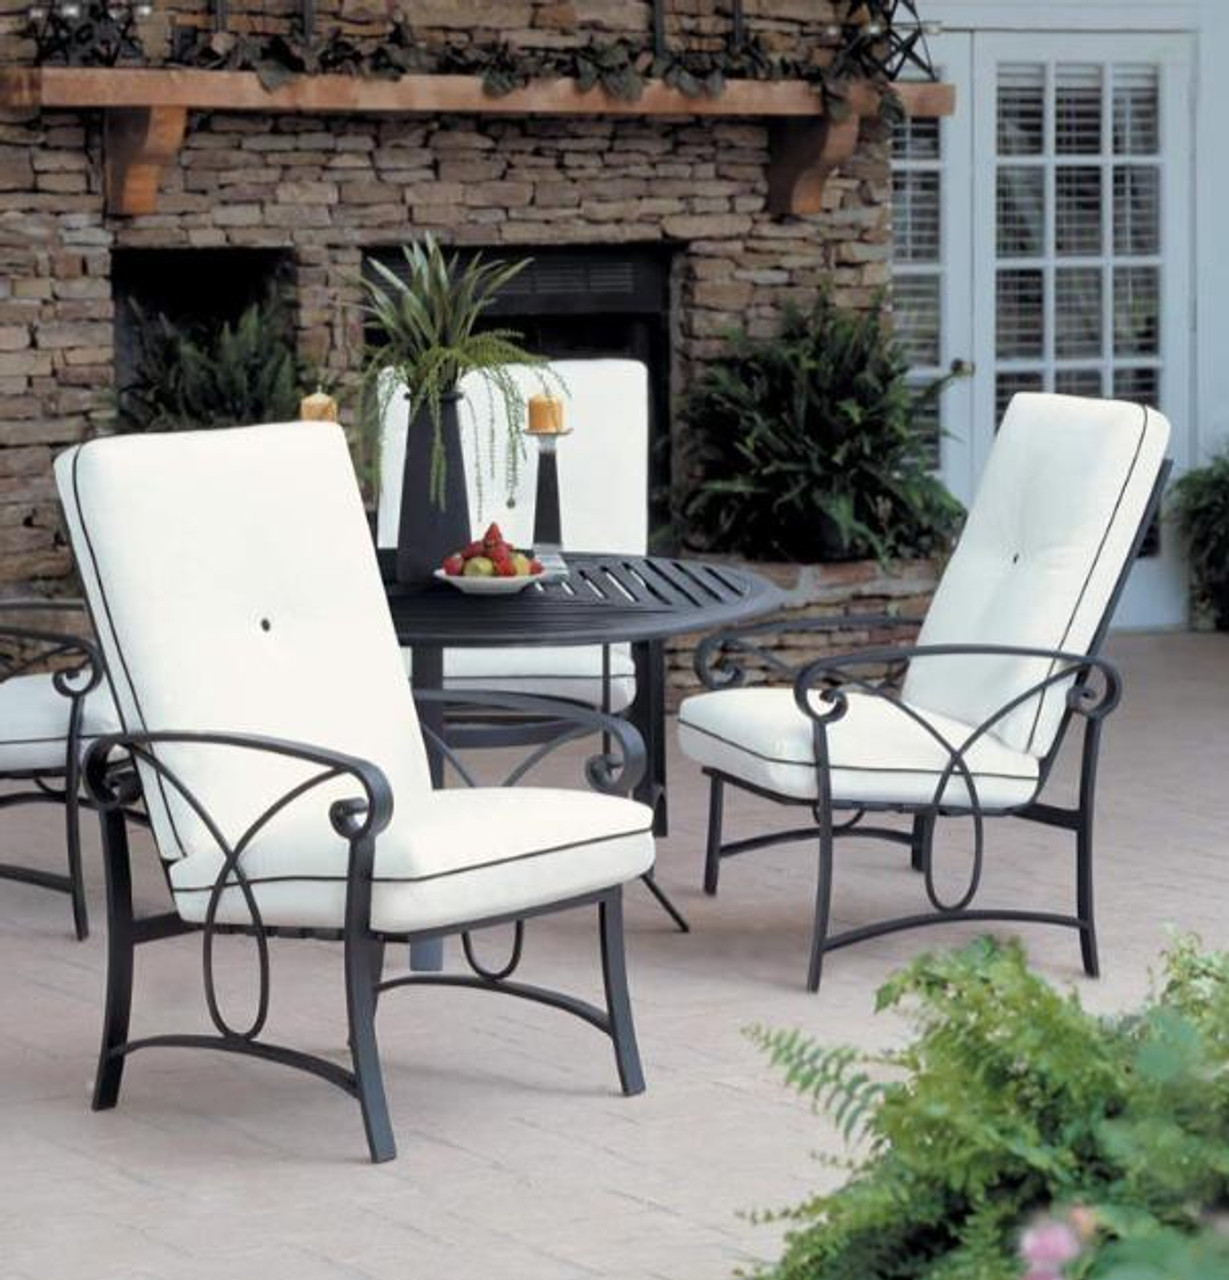 Palazzo Collection Featuring Cushion Seating Winston Outdoor